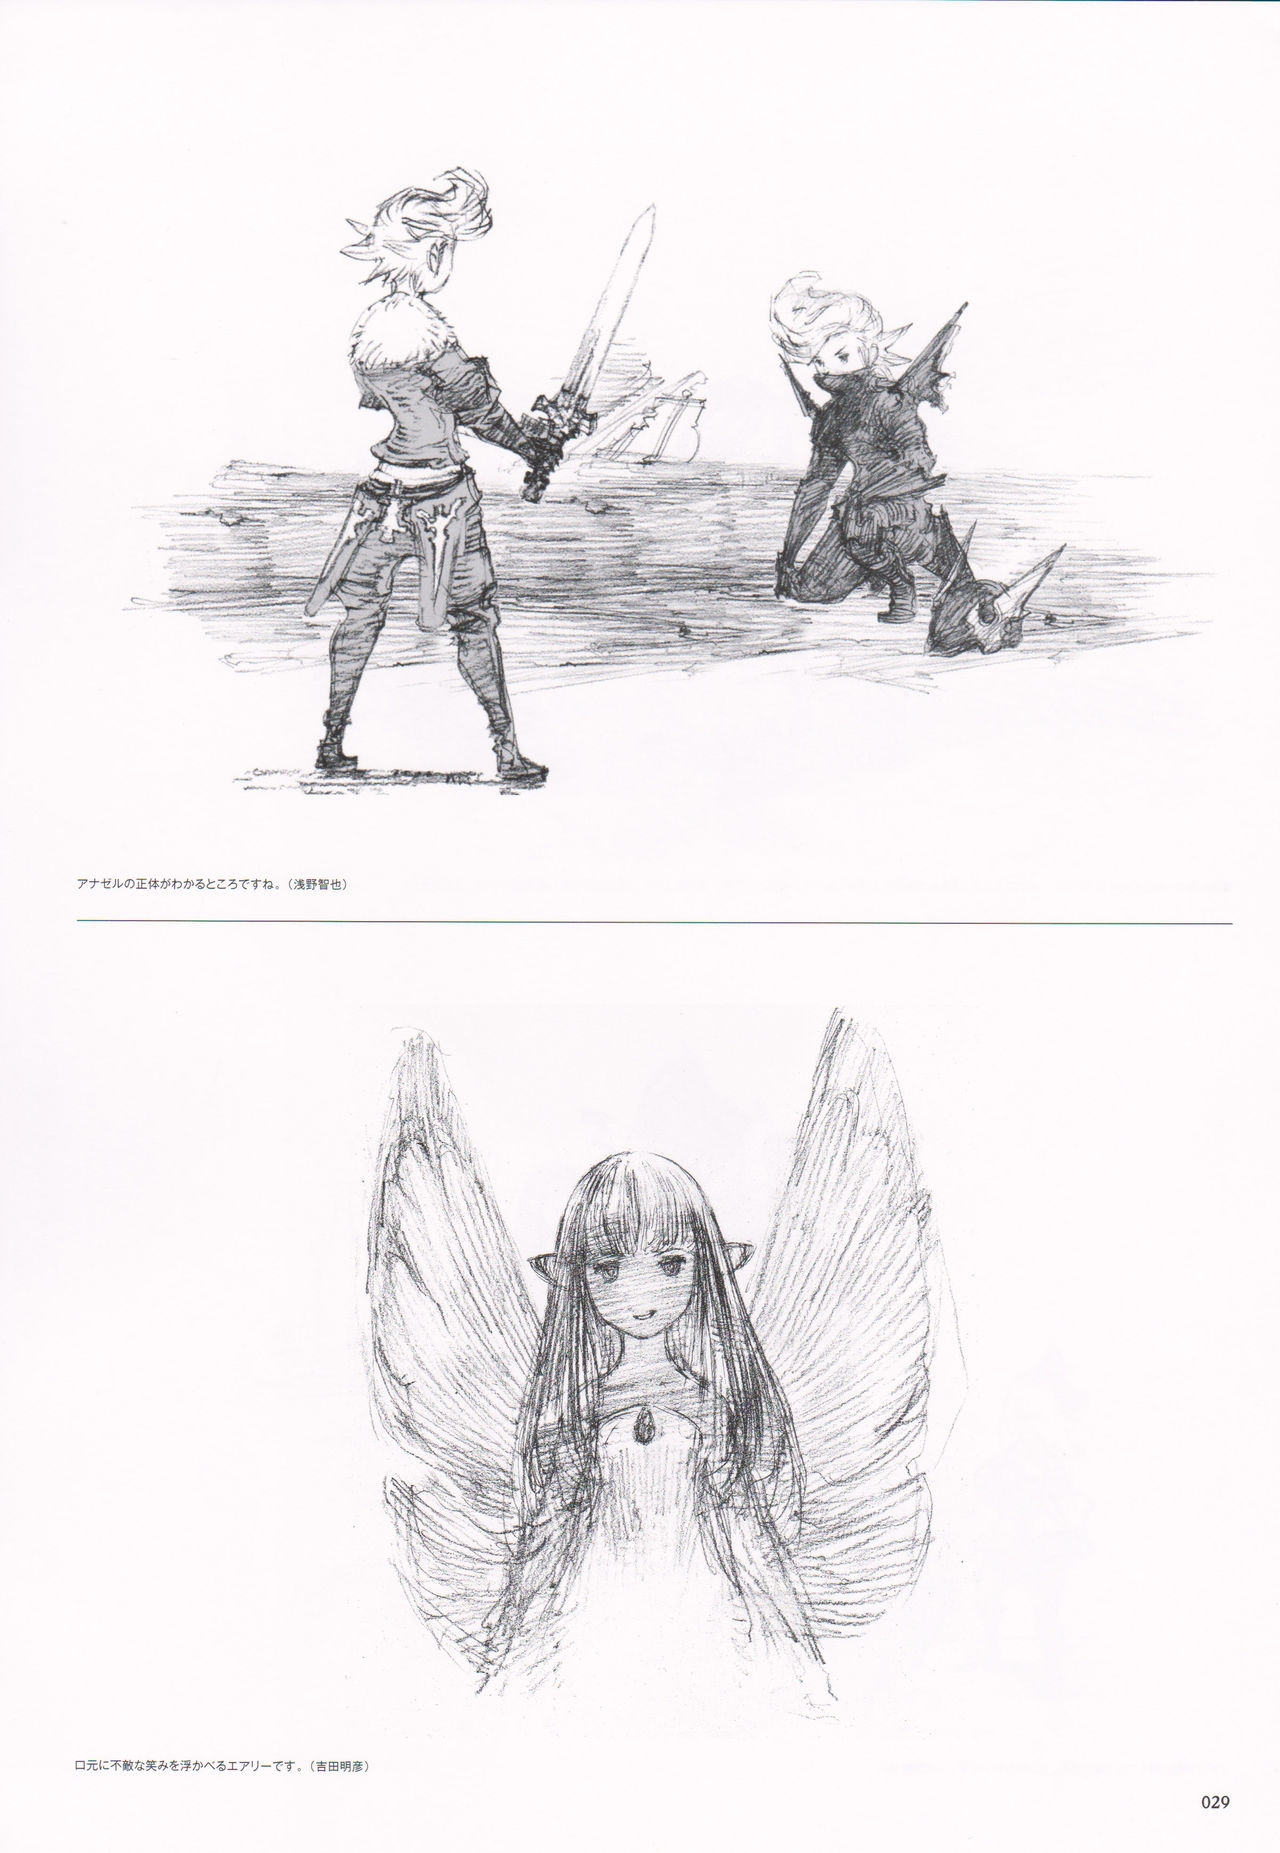 Bravely Second - End Layer - Design Works THE ART OF BRAVELY 2013-2015 29